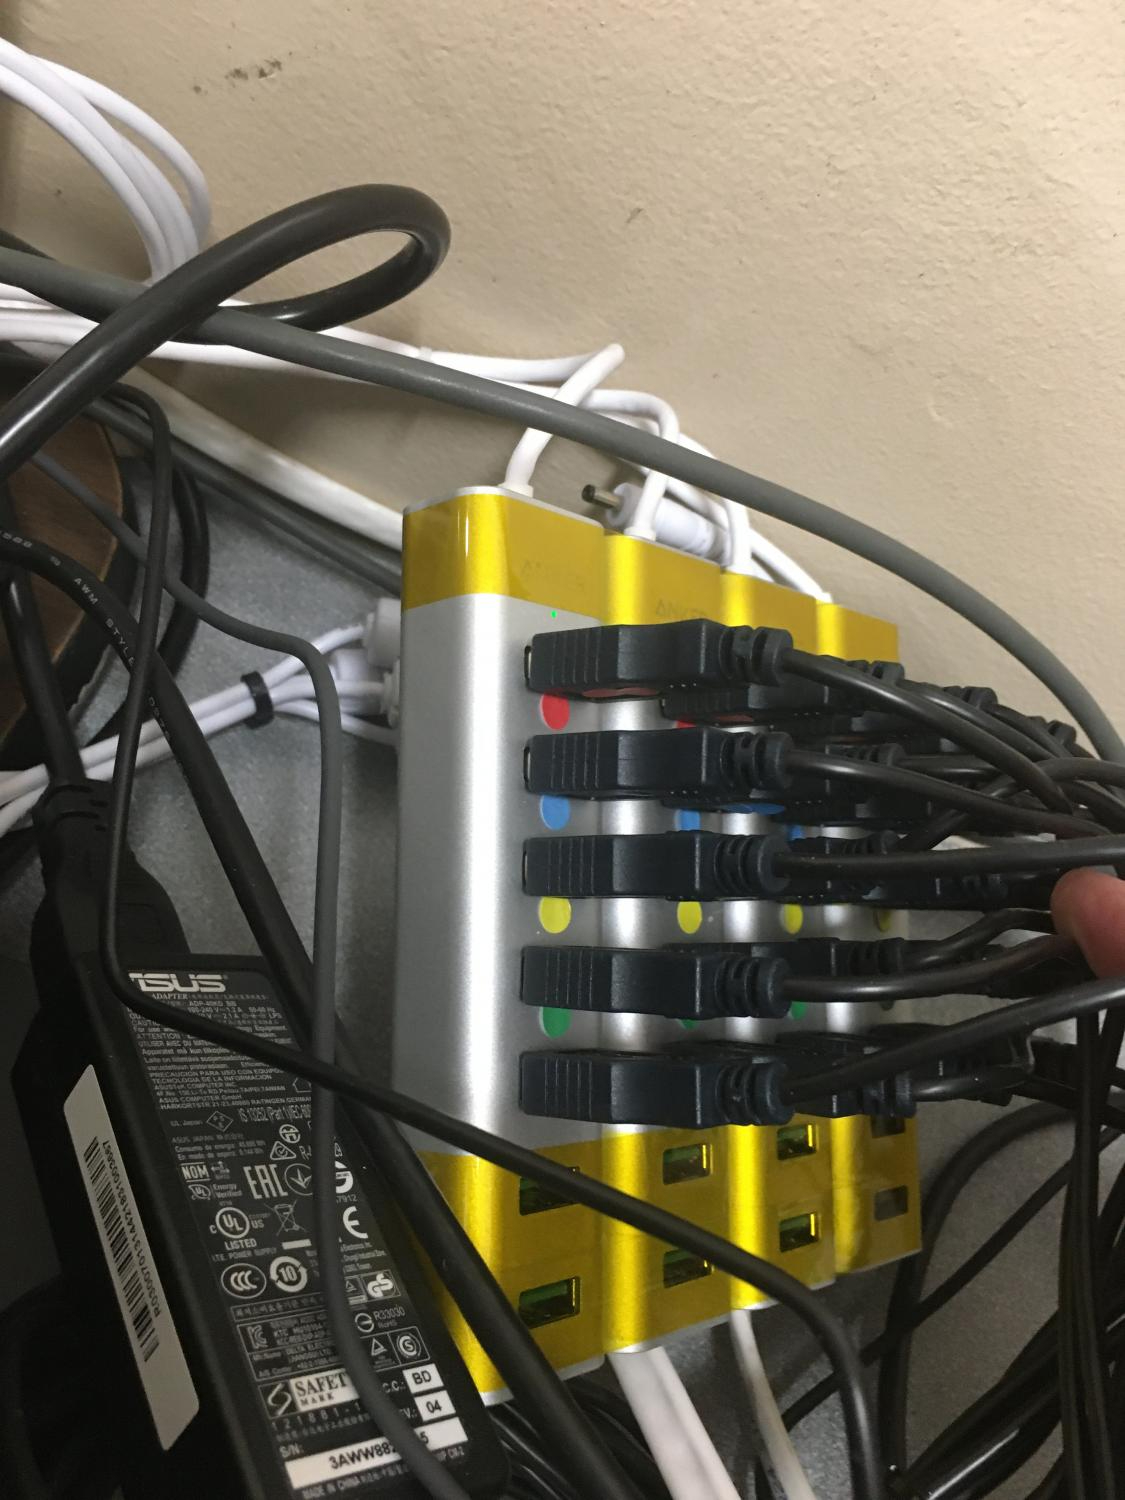 Colored connection dots on the USB Hubs showing where toaster racks should be connected